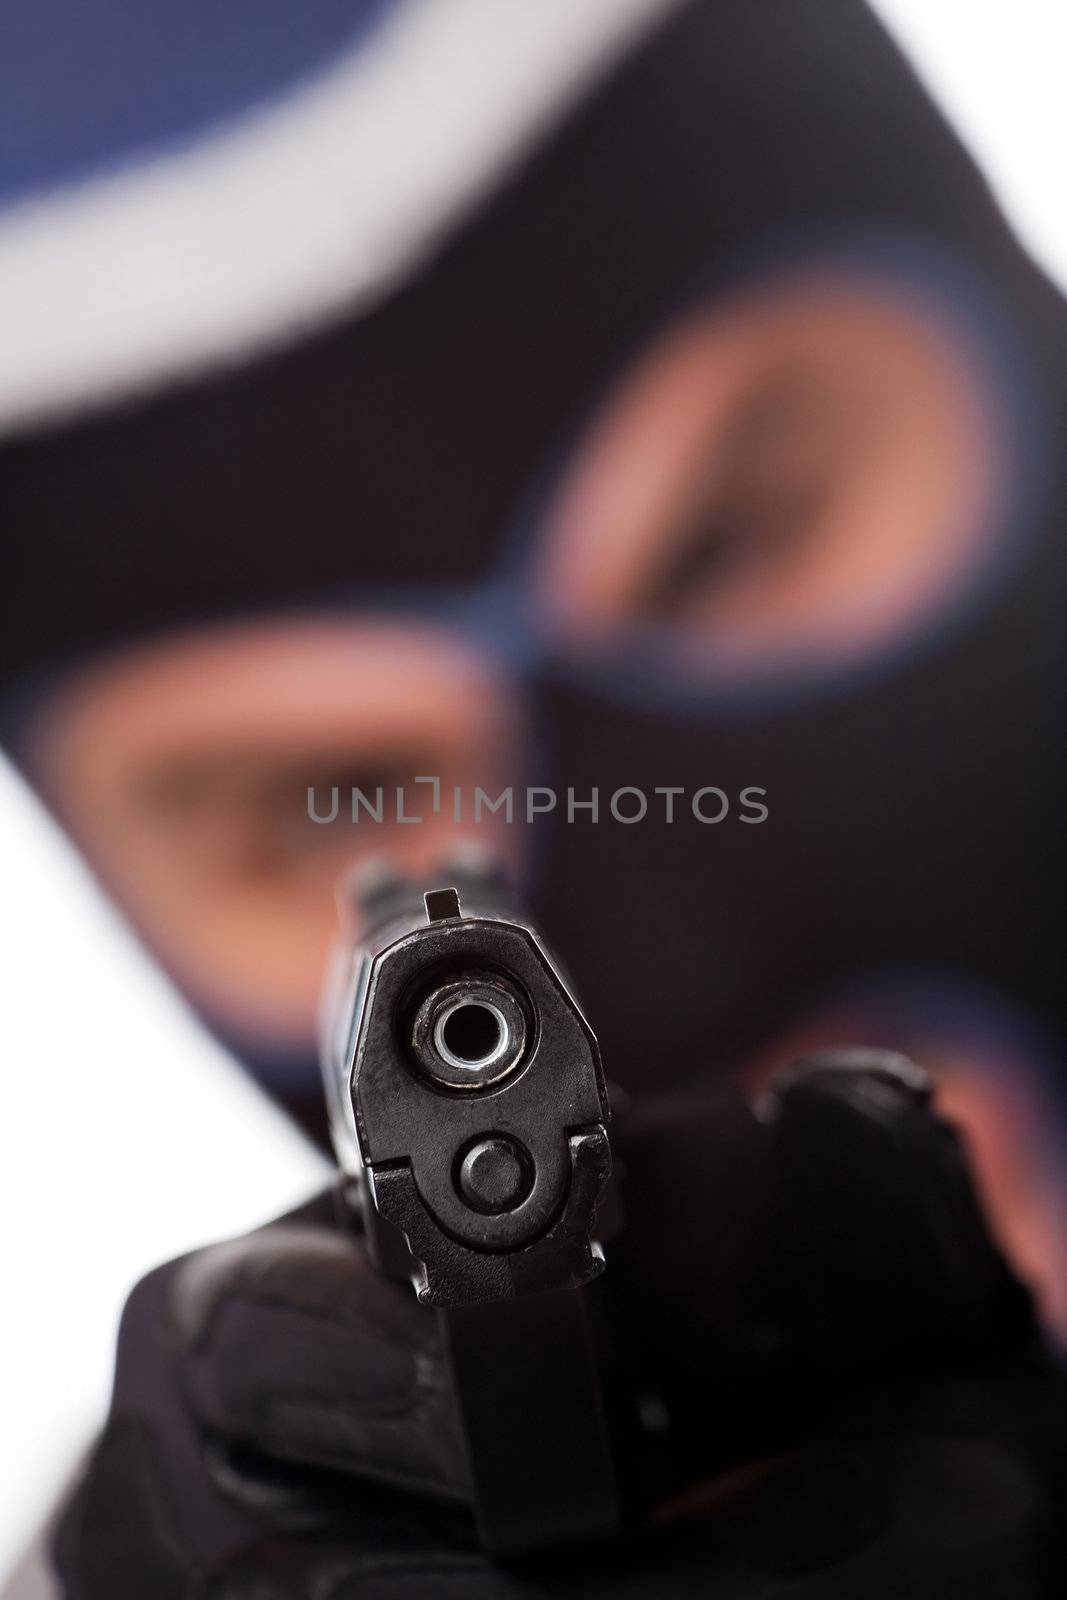 An angry looking man wearing a ski mask pointing a black handgun at the viewer. Shallow depth of field.